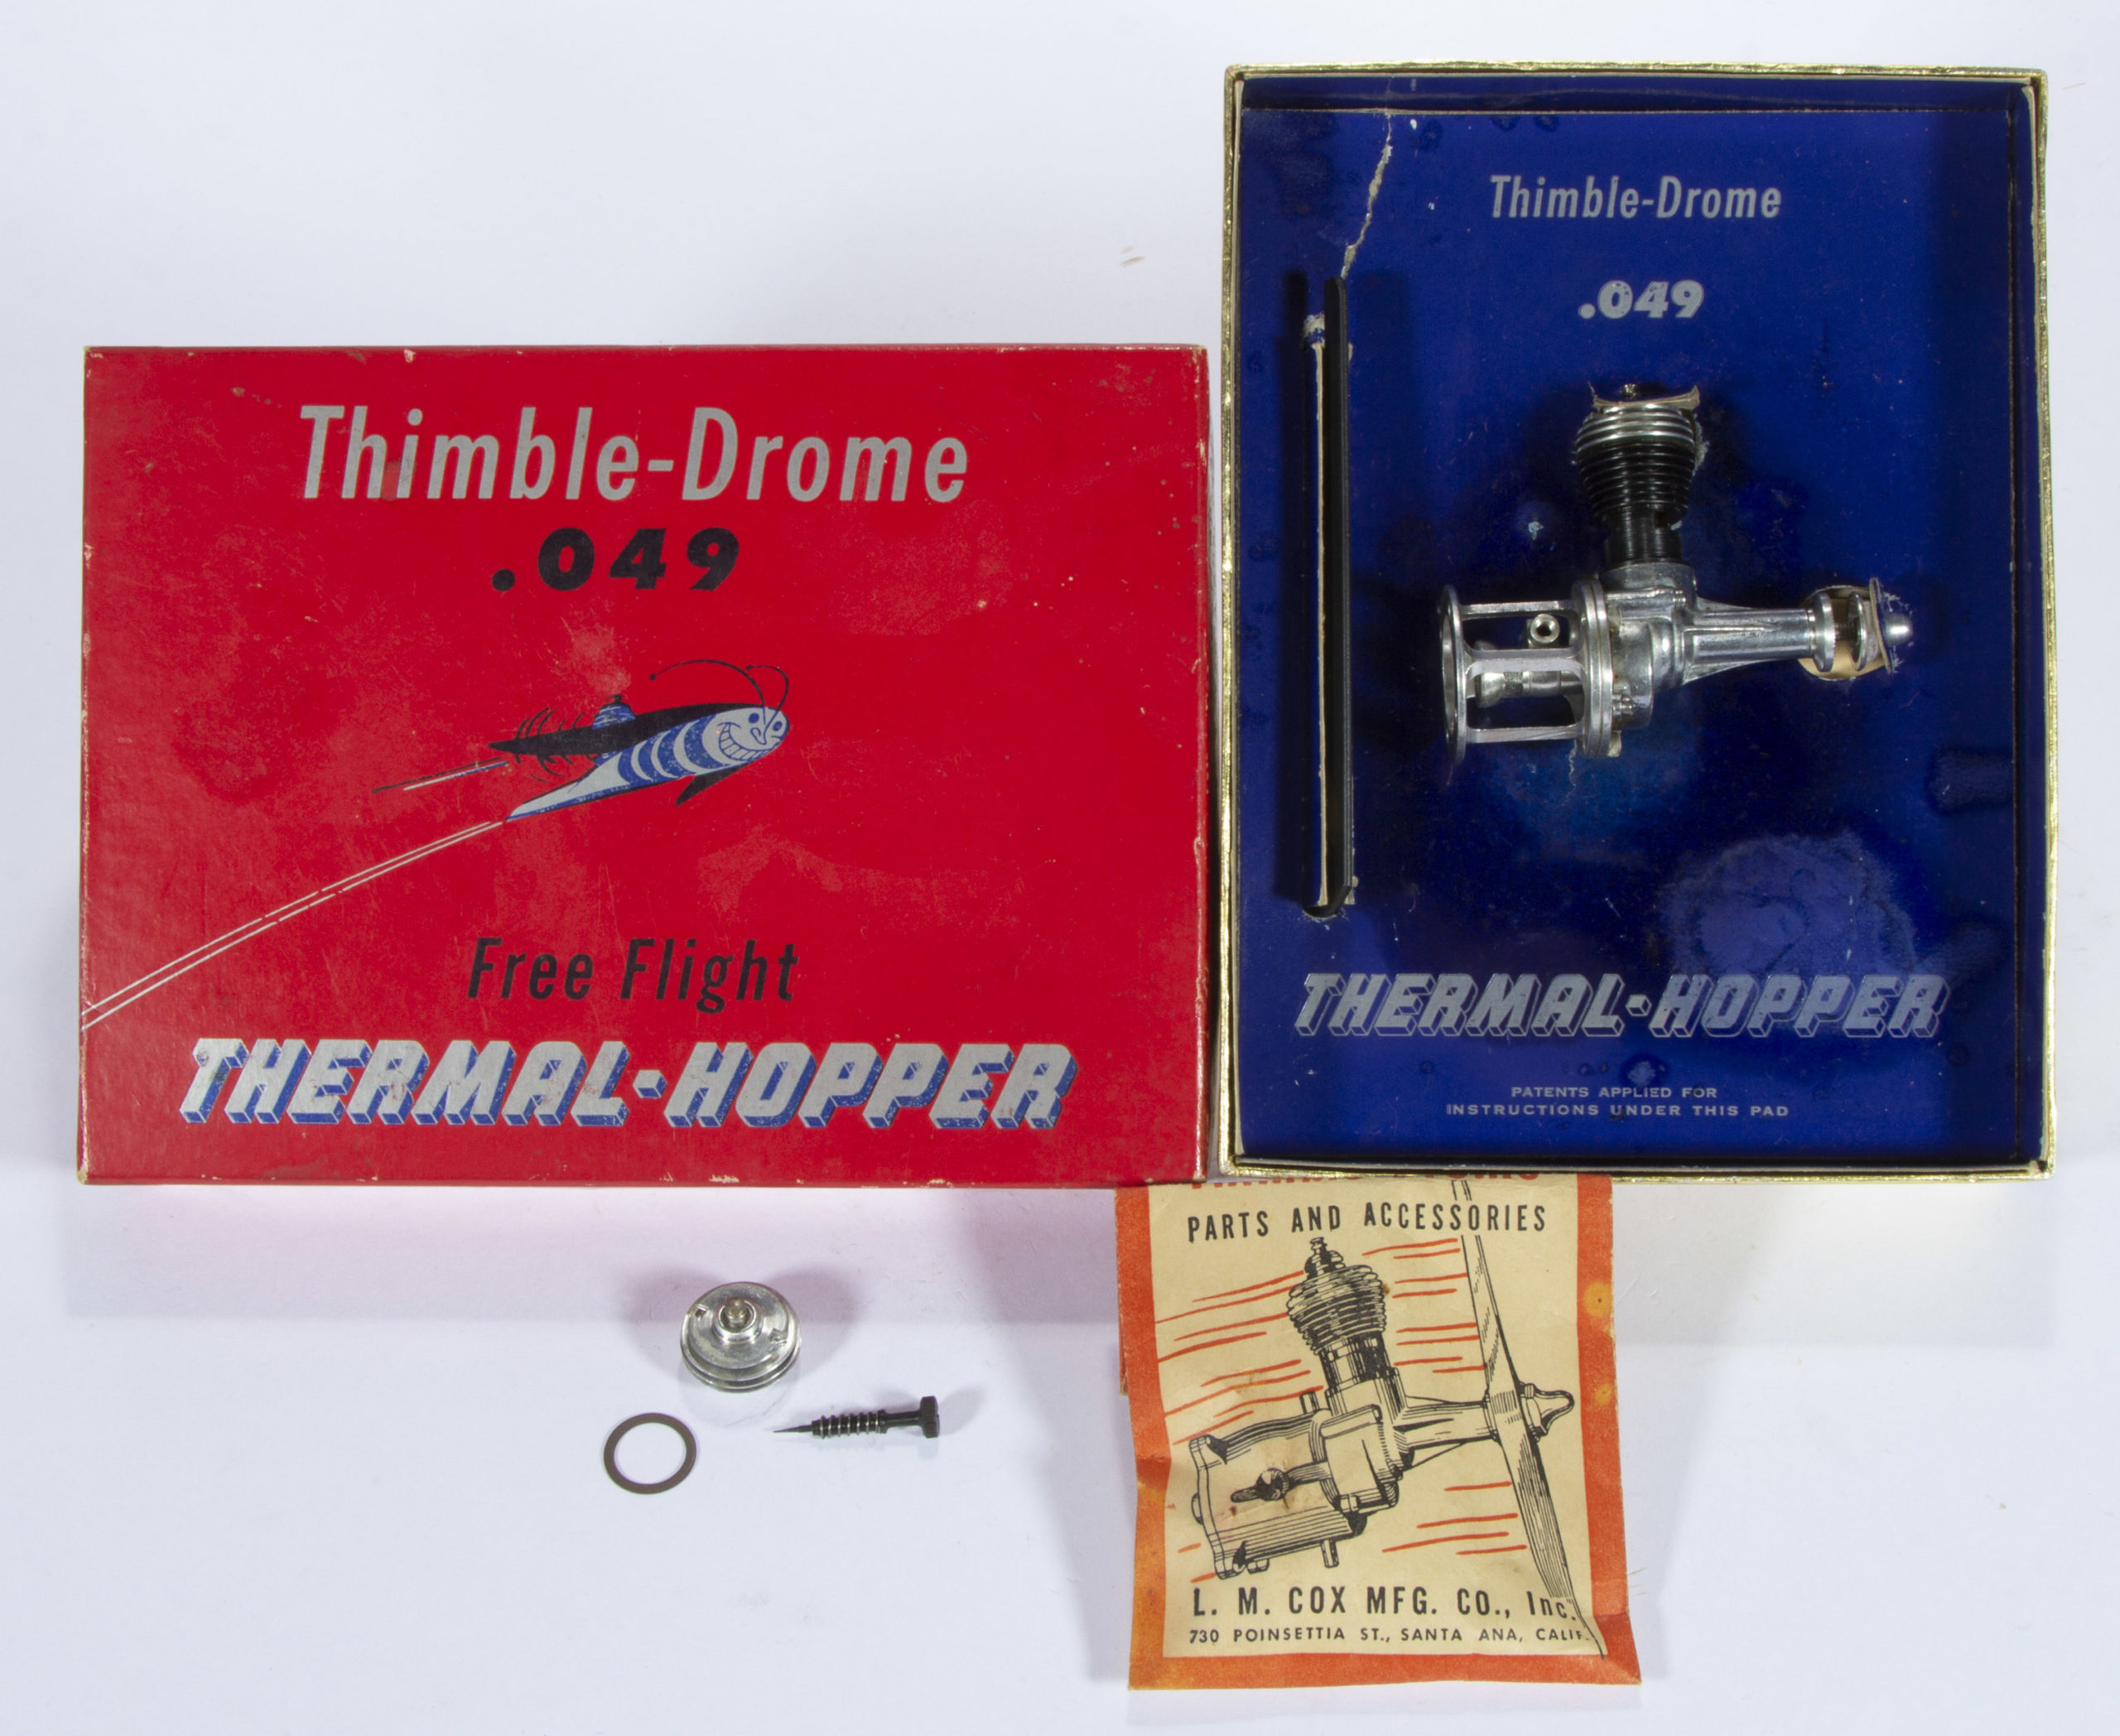 L. M. COX MANUFACTURING CO. “THERMAL-HOPPER” THIMBLE DRONE .049 1953 MODEL AIRPLANE ENGINE,